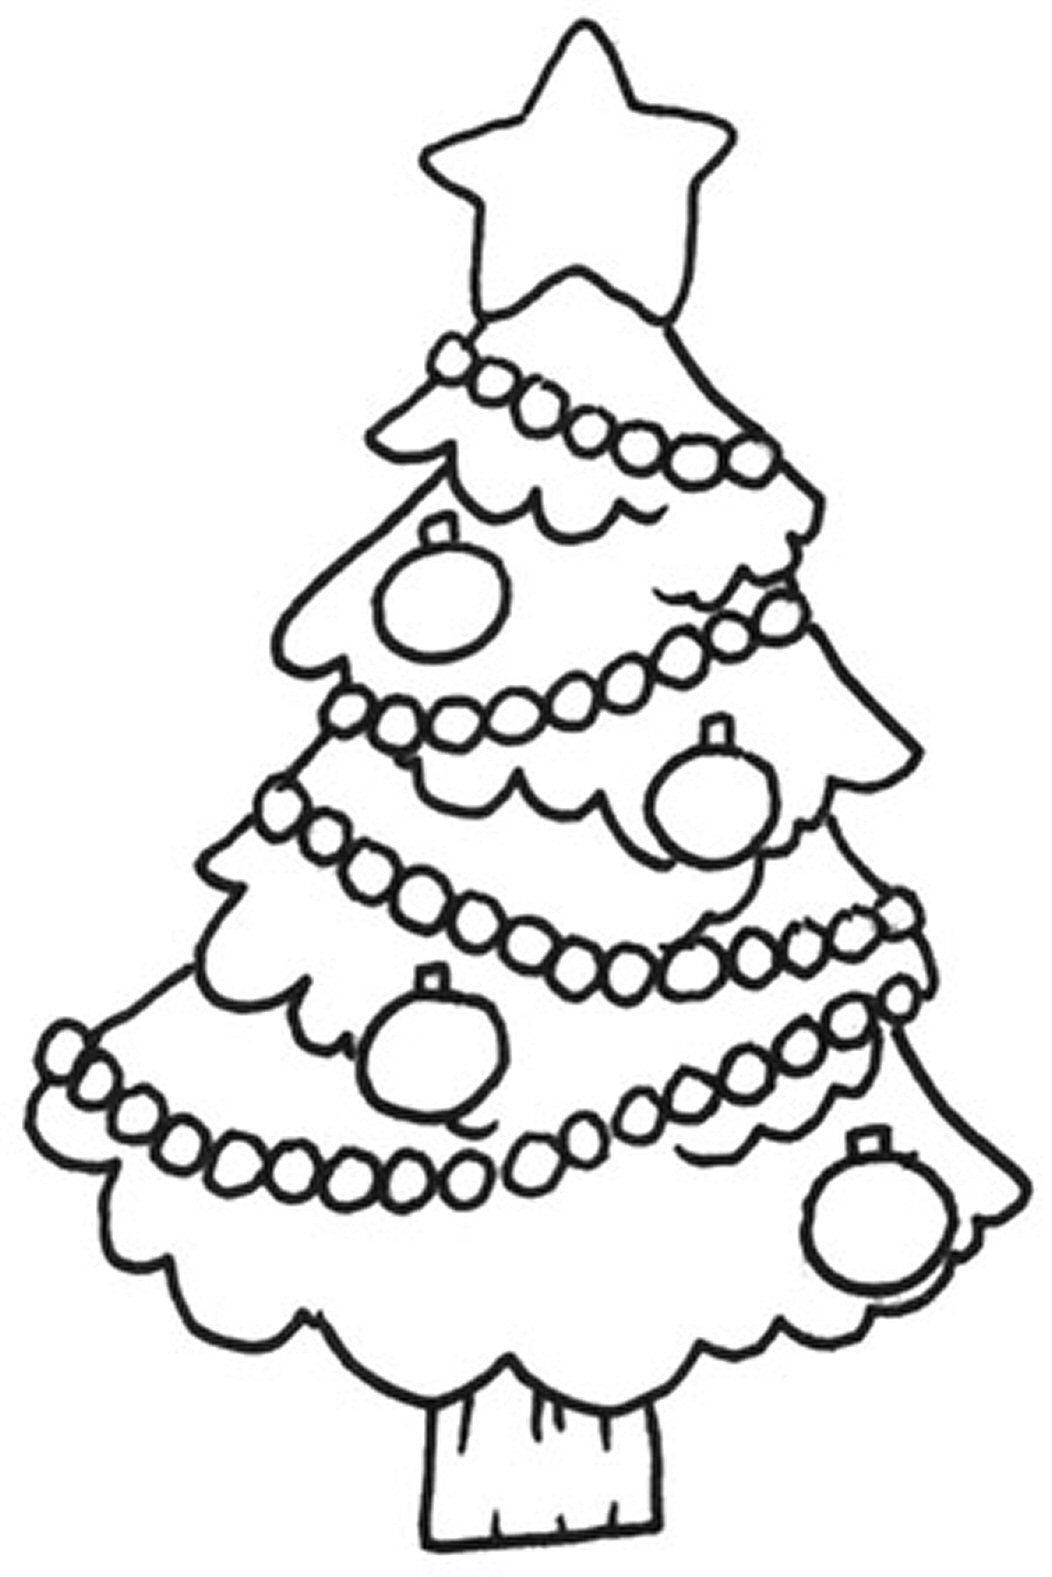 Free Printable Christmas Tree Coloring Pages For Kids - ClipArt ...